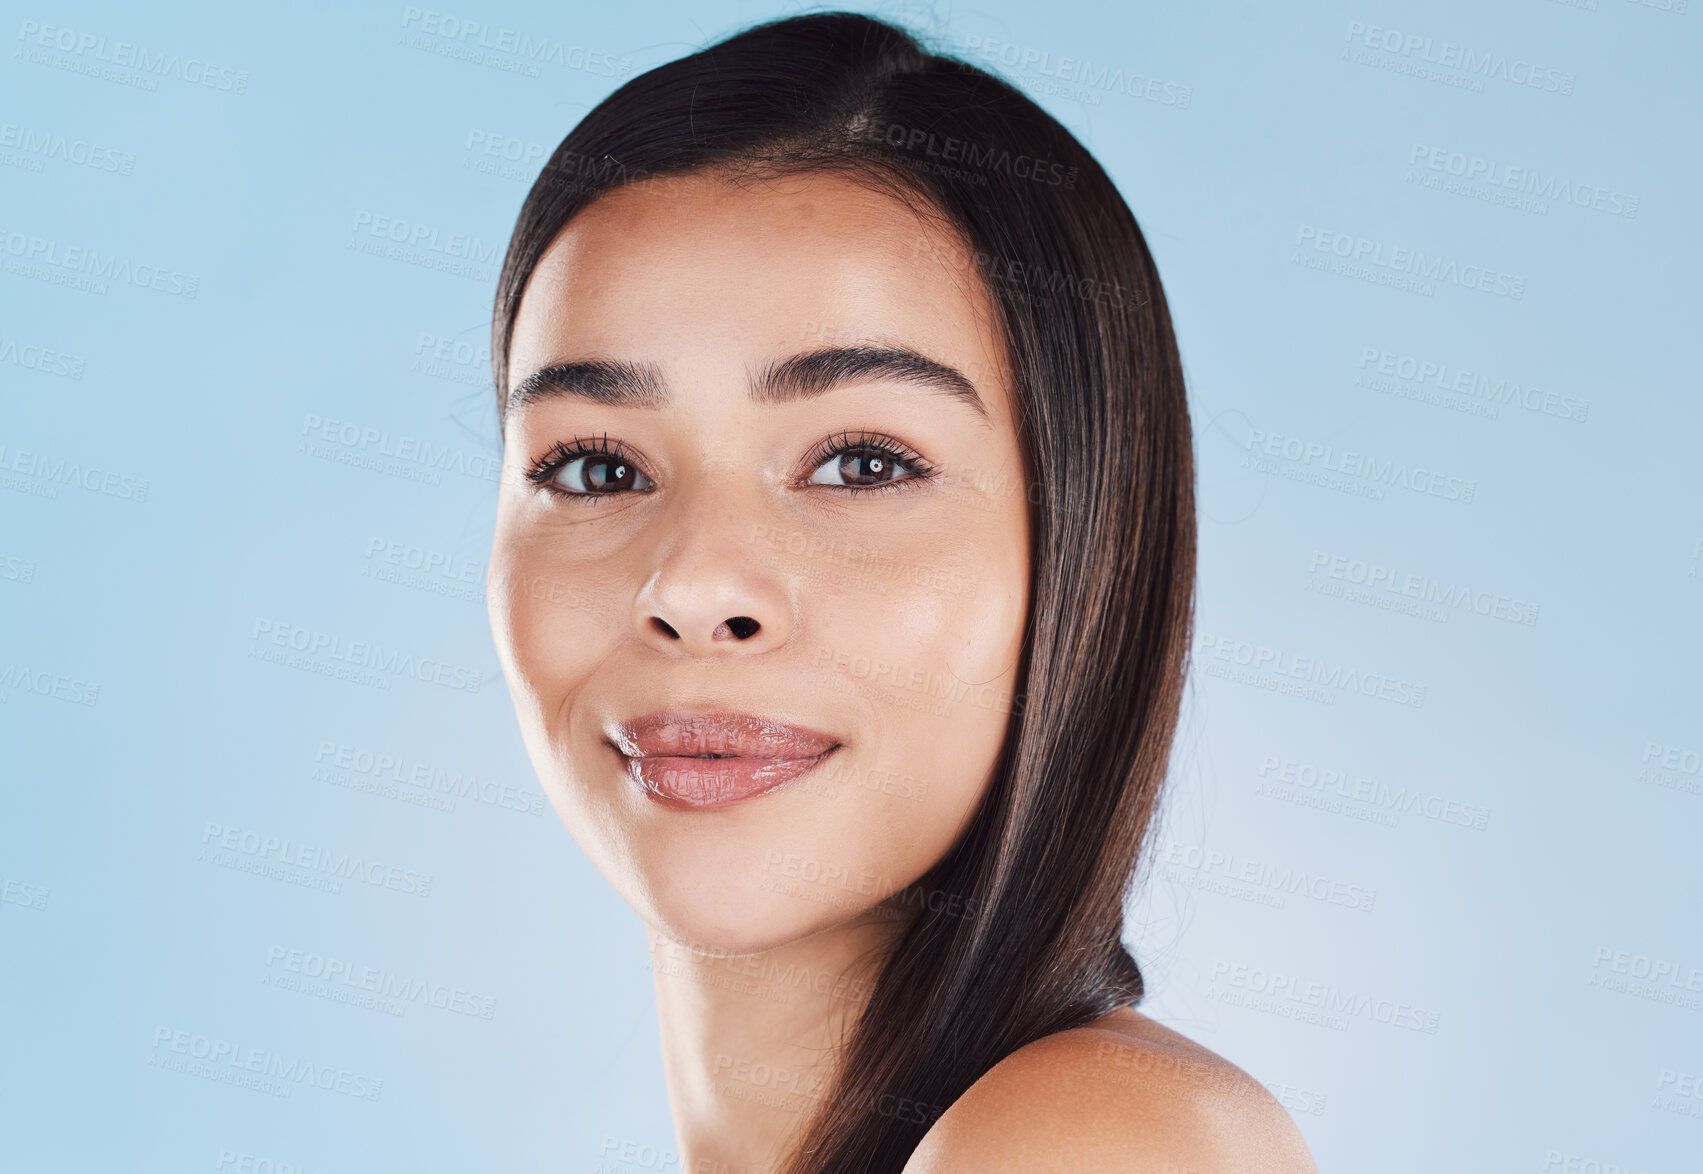 Buy stock photo Portrait of one beautiful young hispanic woman with healthy skin and sleek hair posing against a blue studio background. Mixed race model with flawless complexion and natural beauty